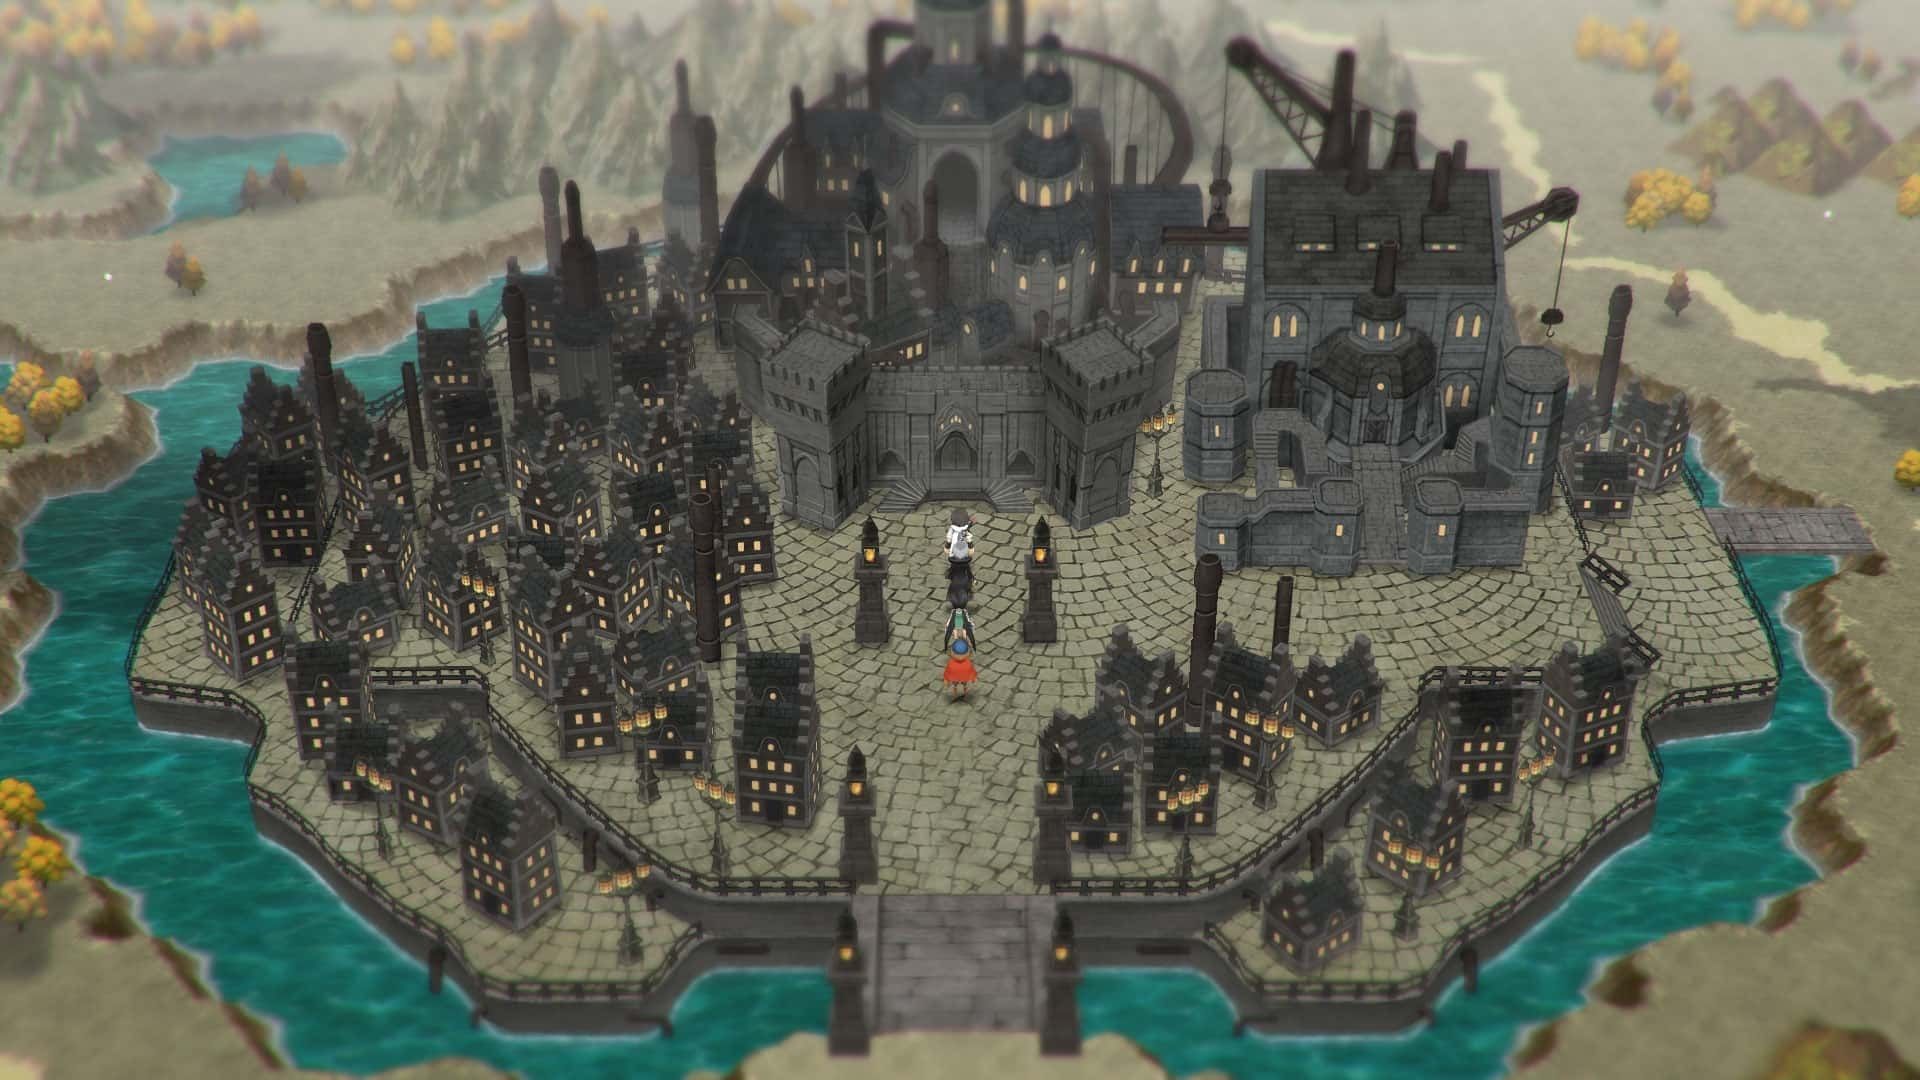 Lost Sphear' is the next retro RPG from Tokyo RPG Factory